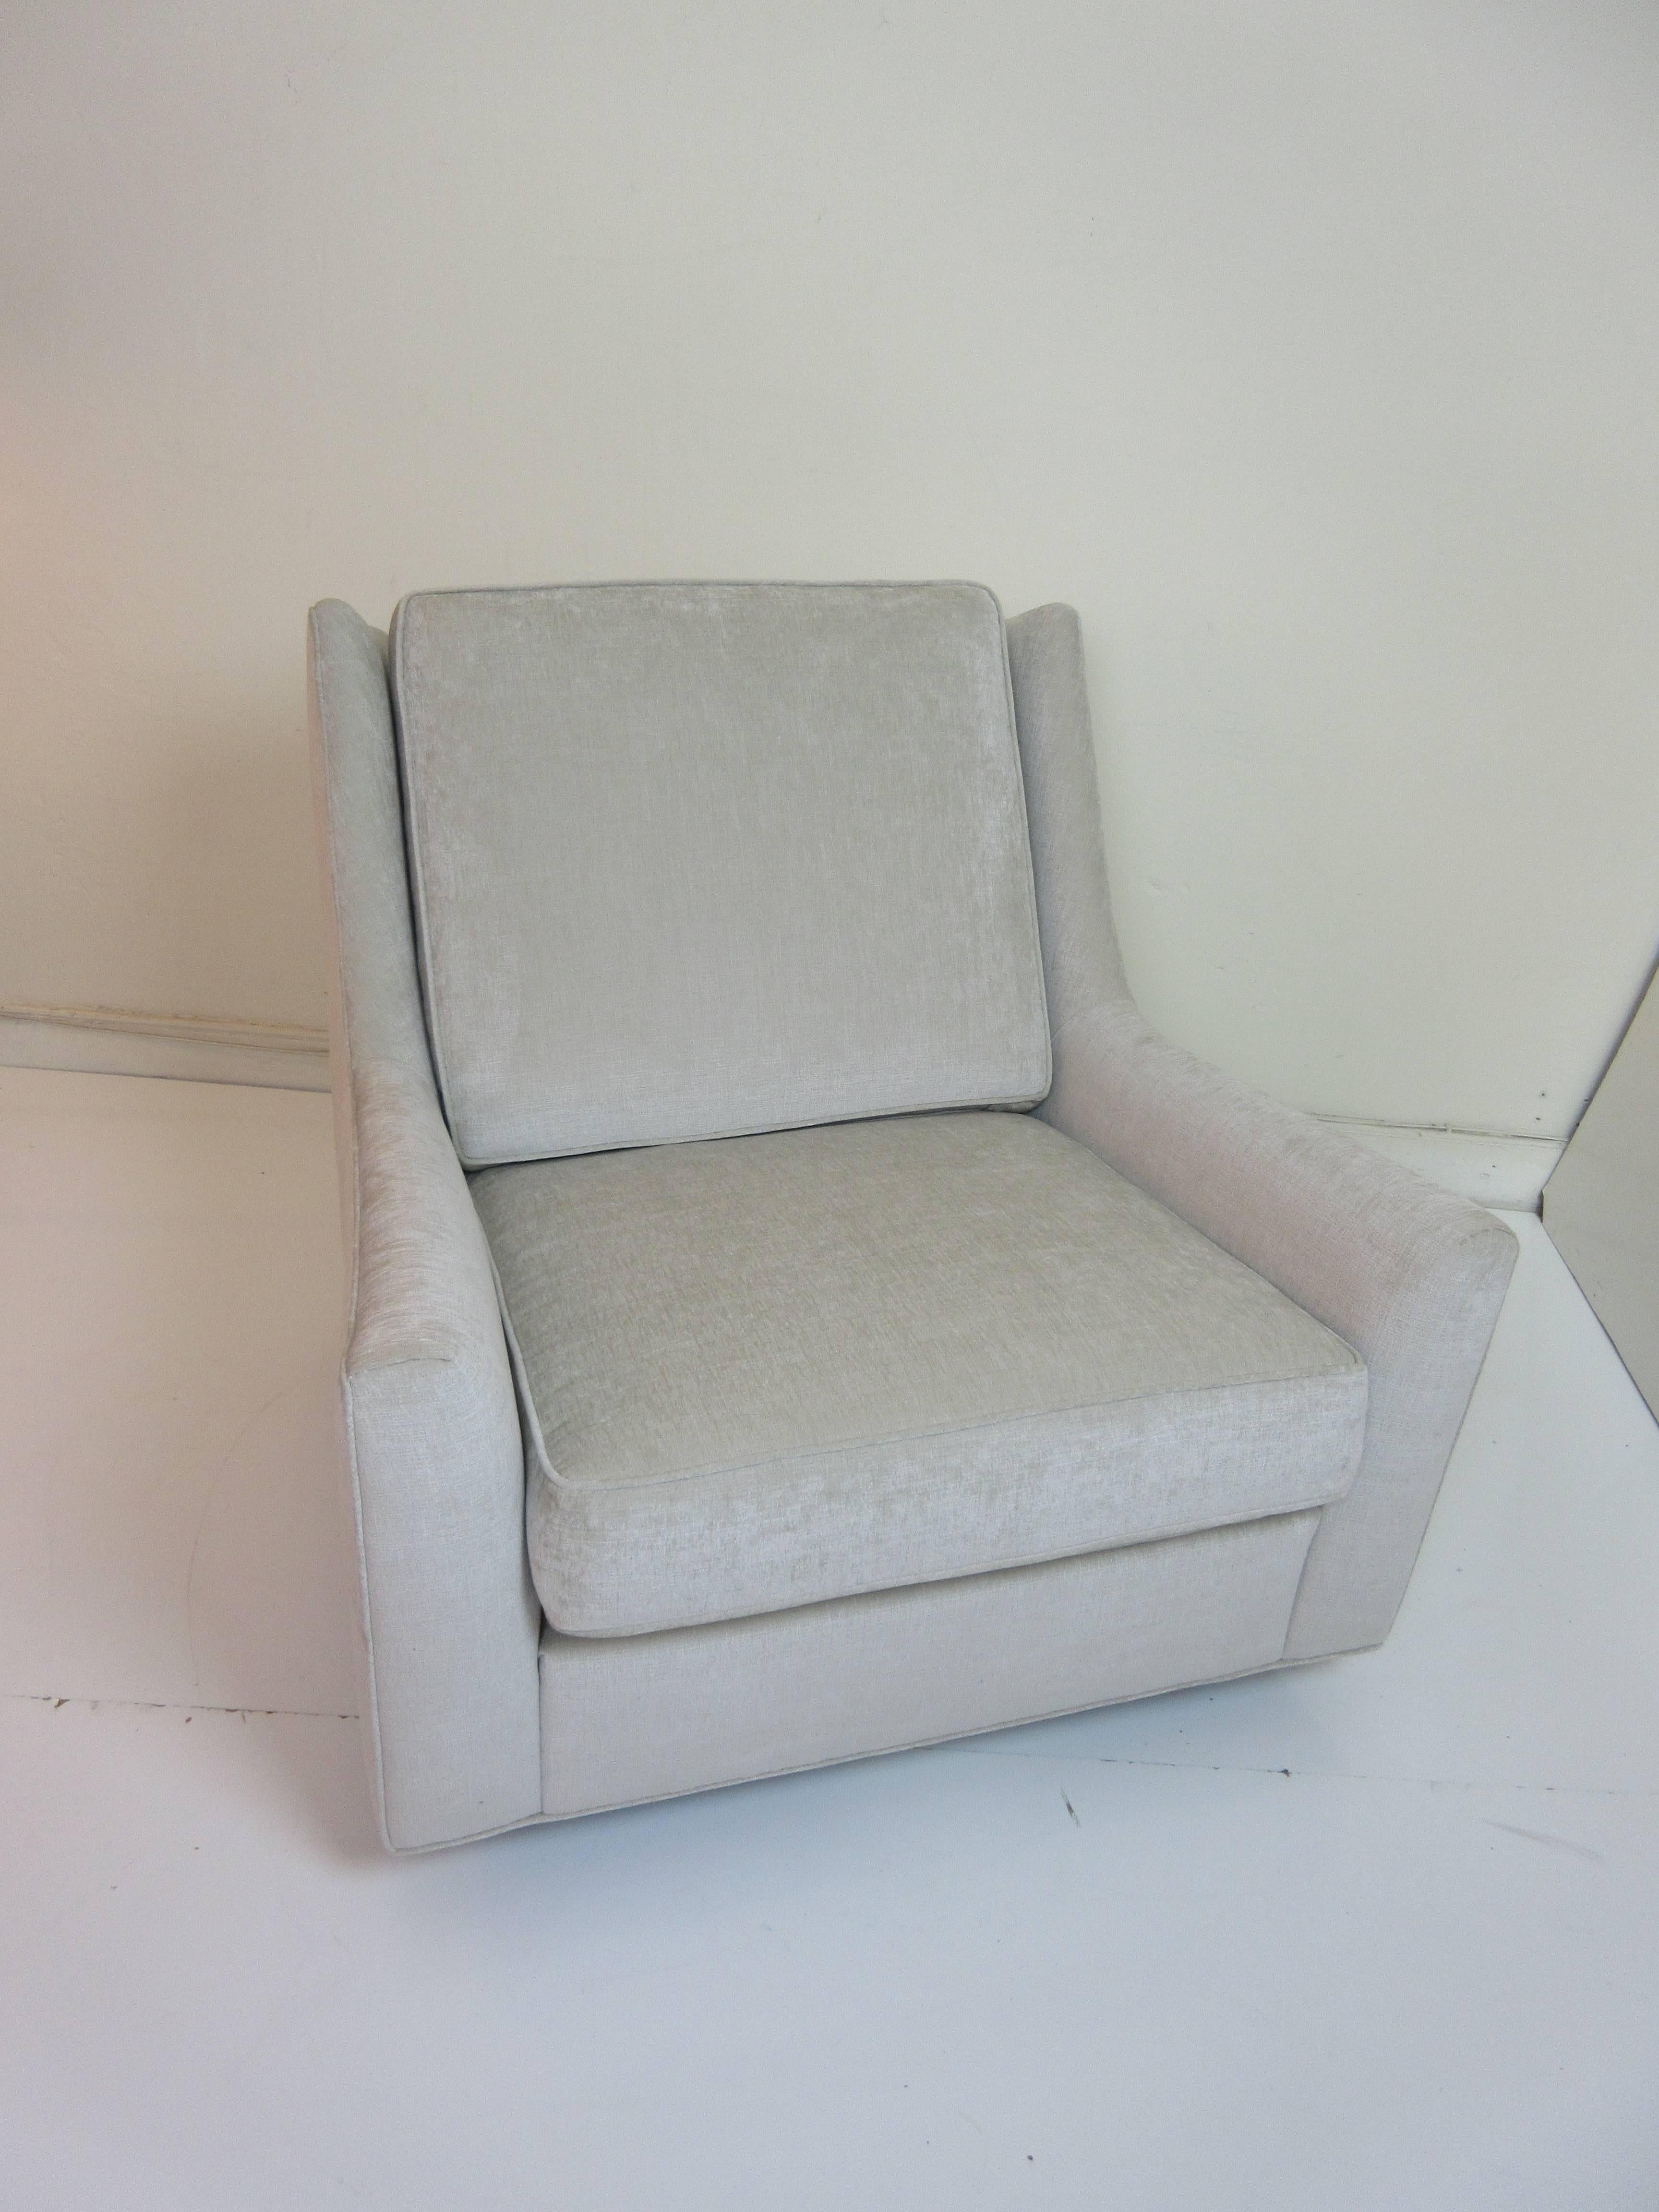 Upholstery Floating Oversized Milo Baughman Lounge Chair